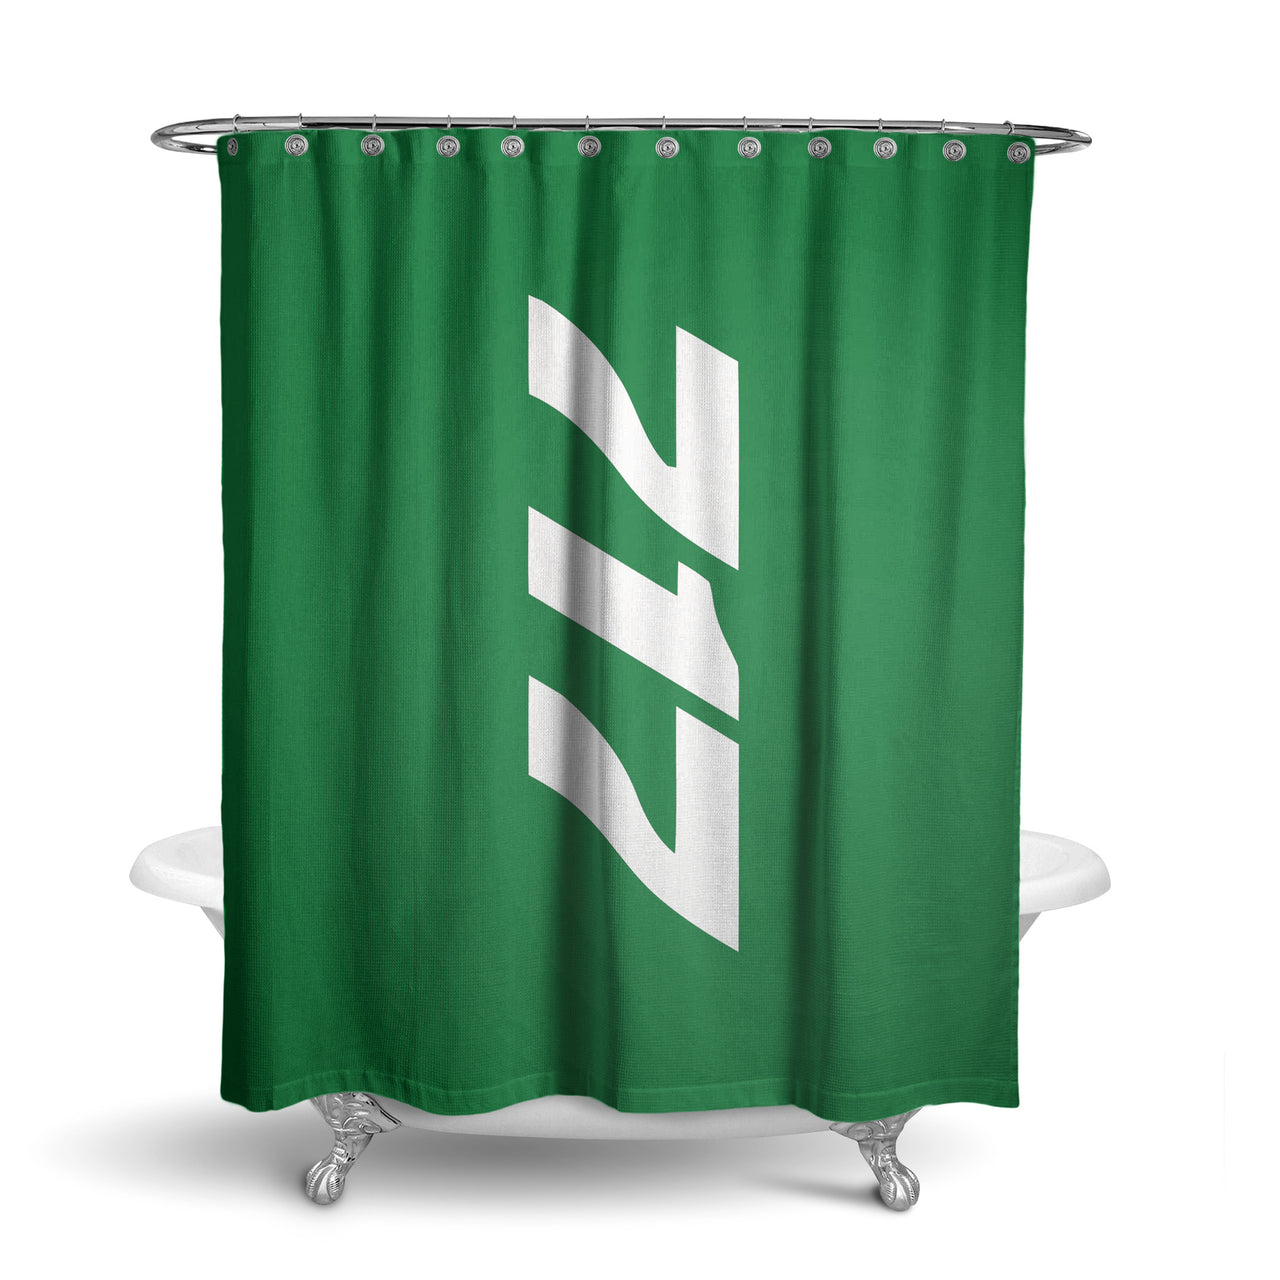 Boeing 717 Text Designed Shower Curtains